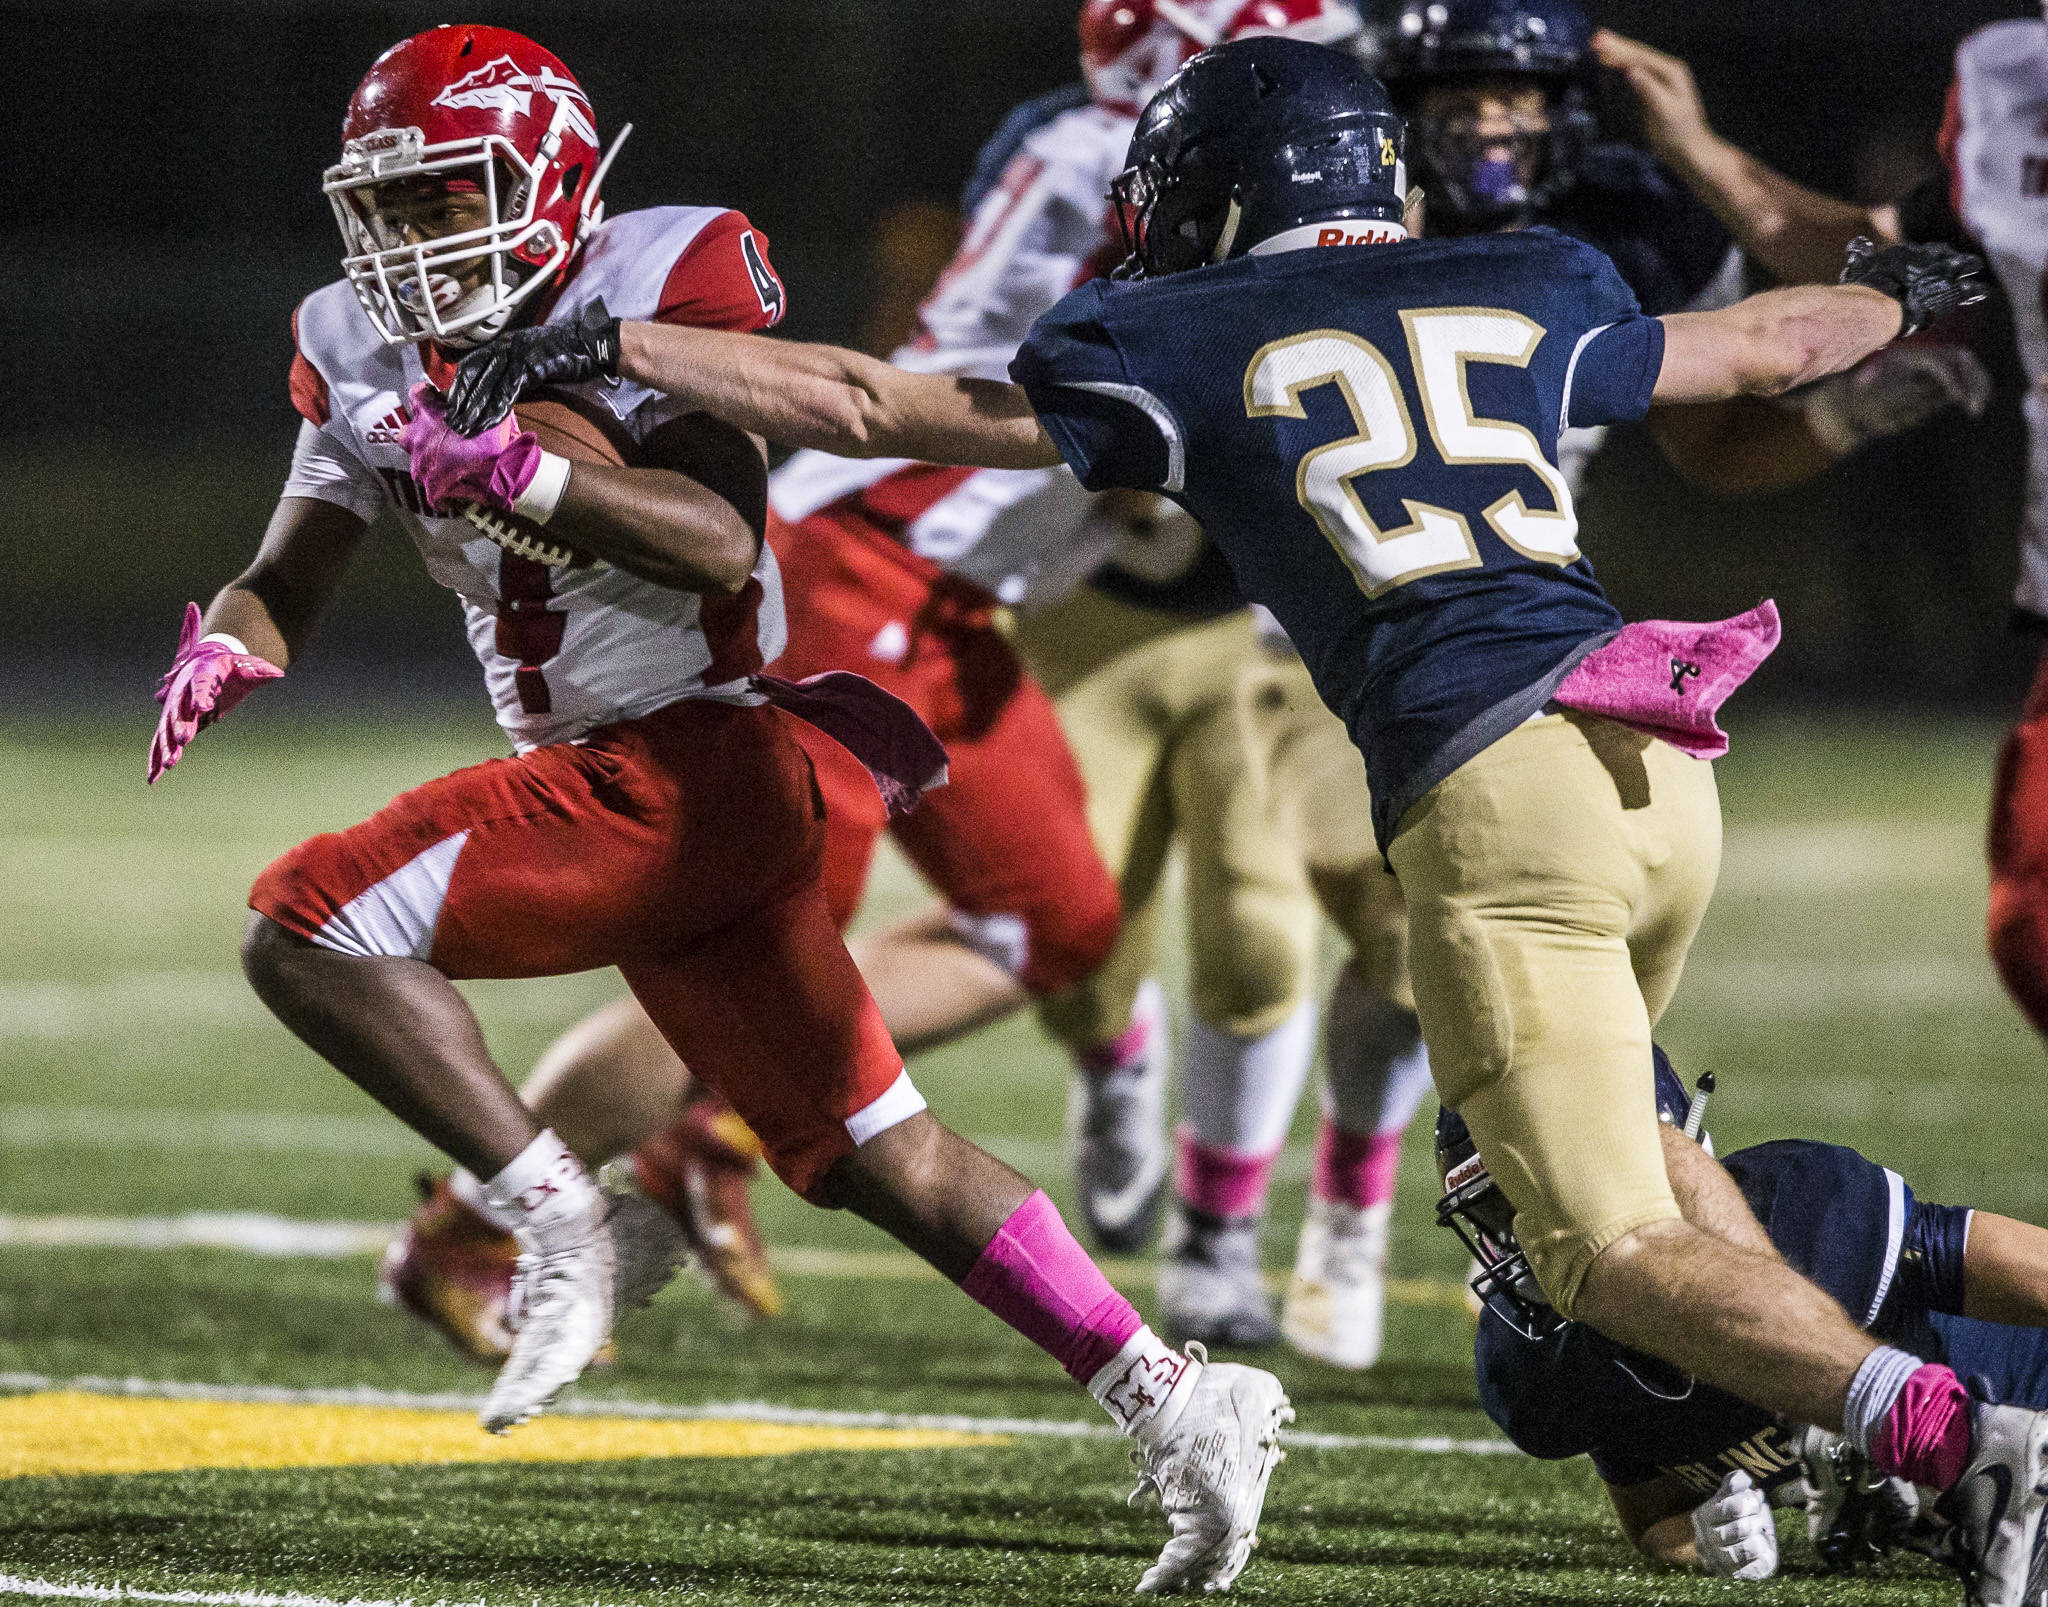 Marysville Pilchuck’s Jay Gray tries to evade Arlington’s Hunter Eastman during a Wesco 3A North game on Friday at John C. Larson Stadium in Arlington. Gray and the Tomahawks beat Eastman and the Eagles 42-14 to clinch the league title. (Olivia Vanni / The Herald)